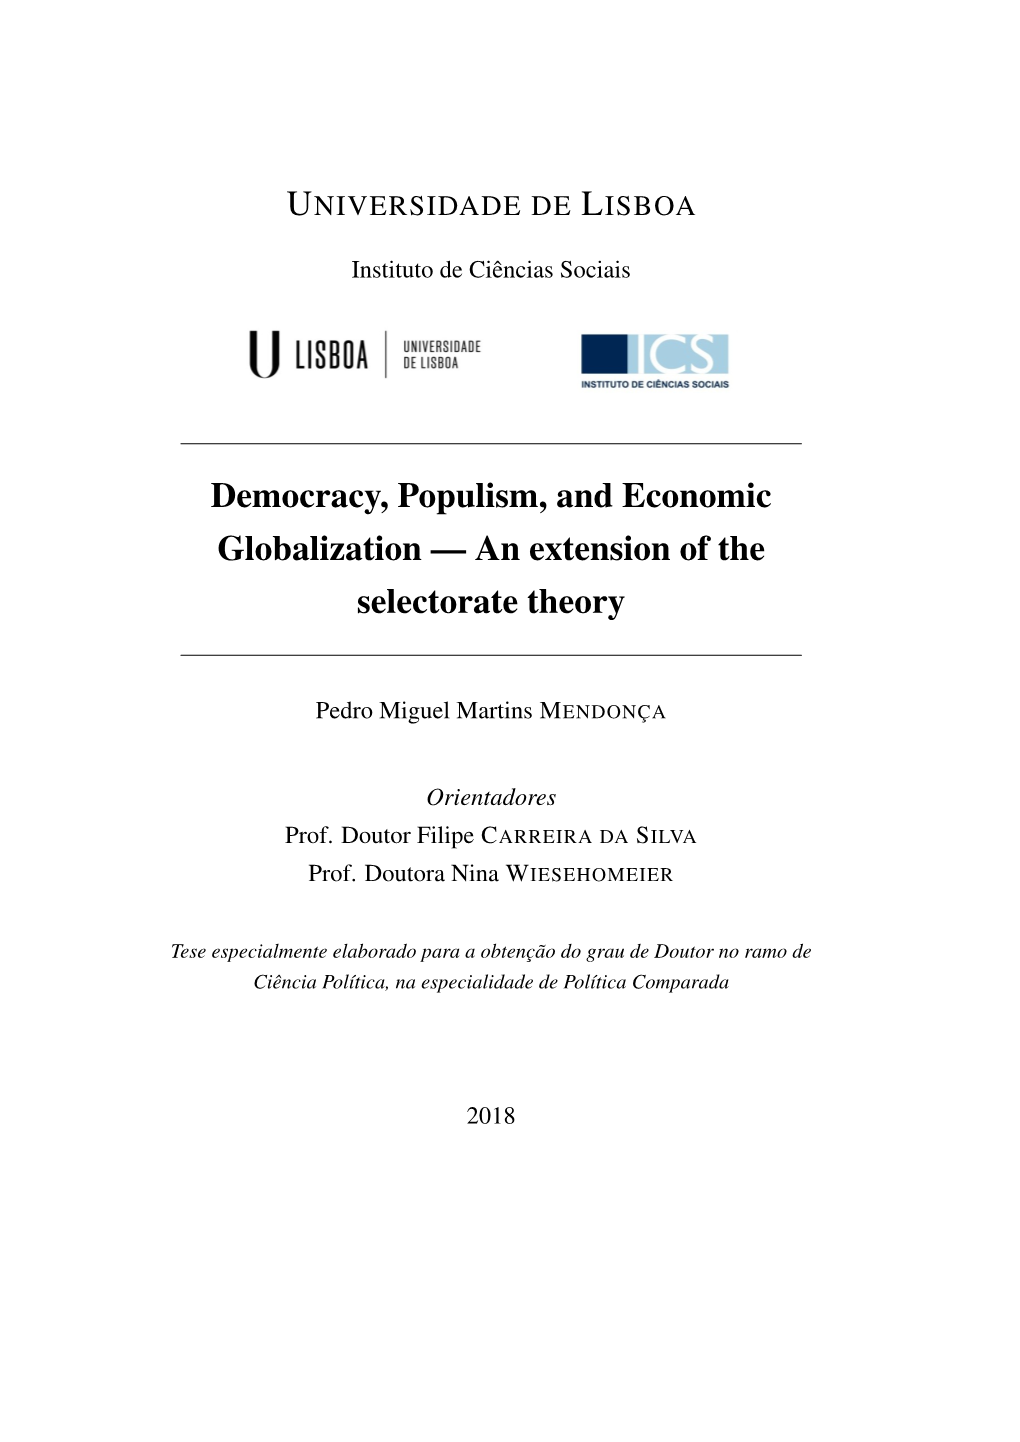 Democracy, Populism, and Economic Globalization — an Extension of the Selectorate Theory